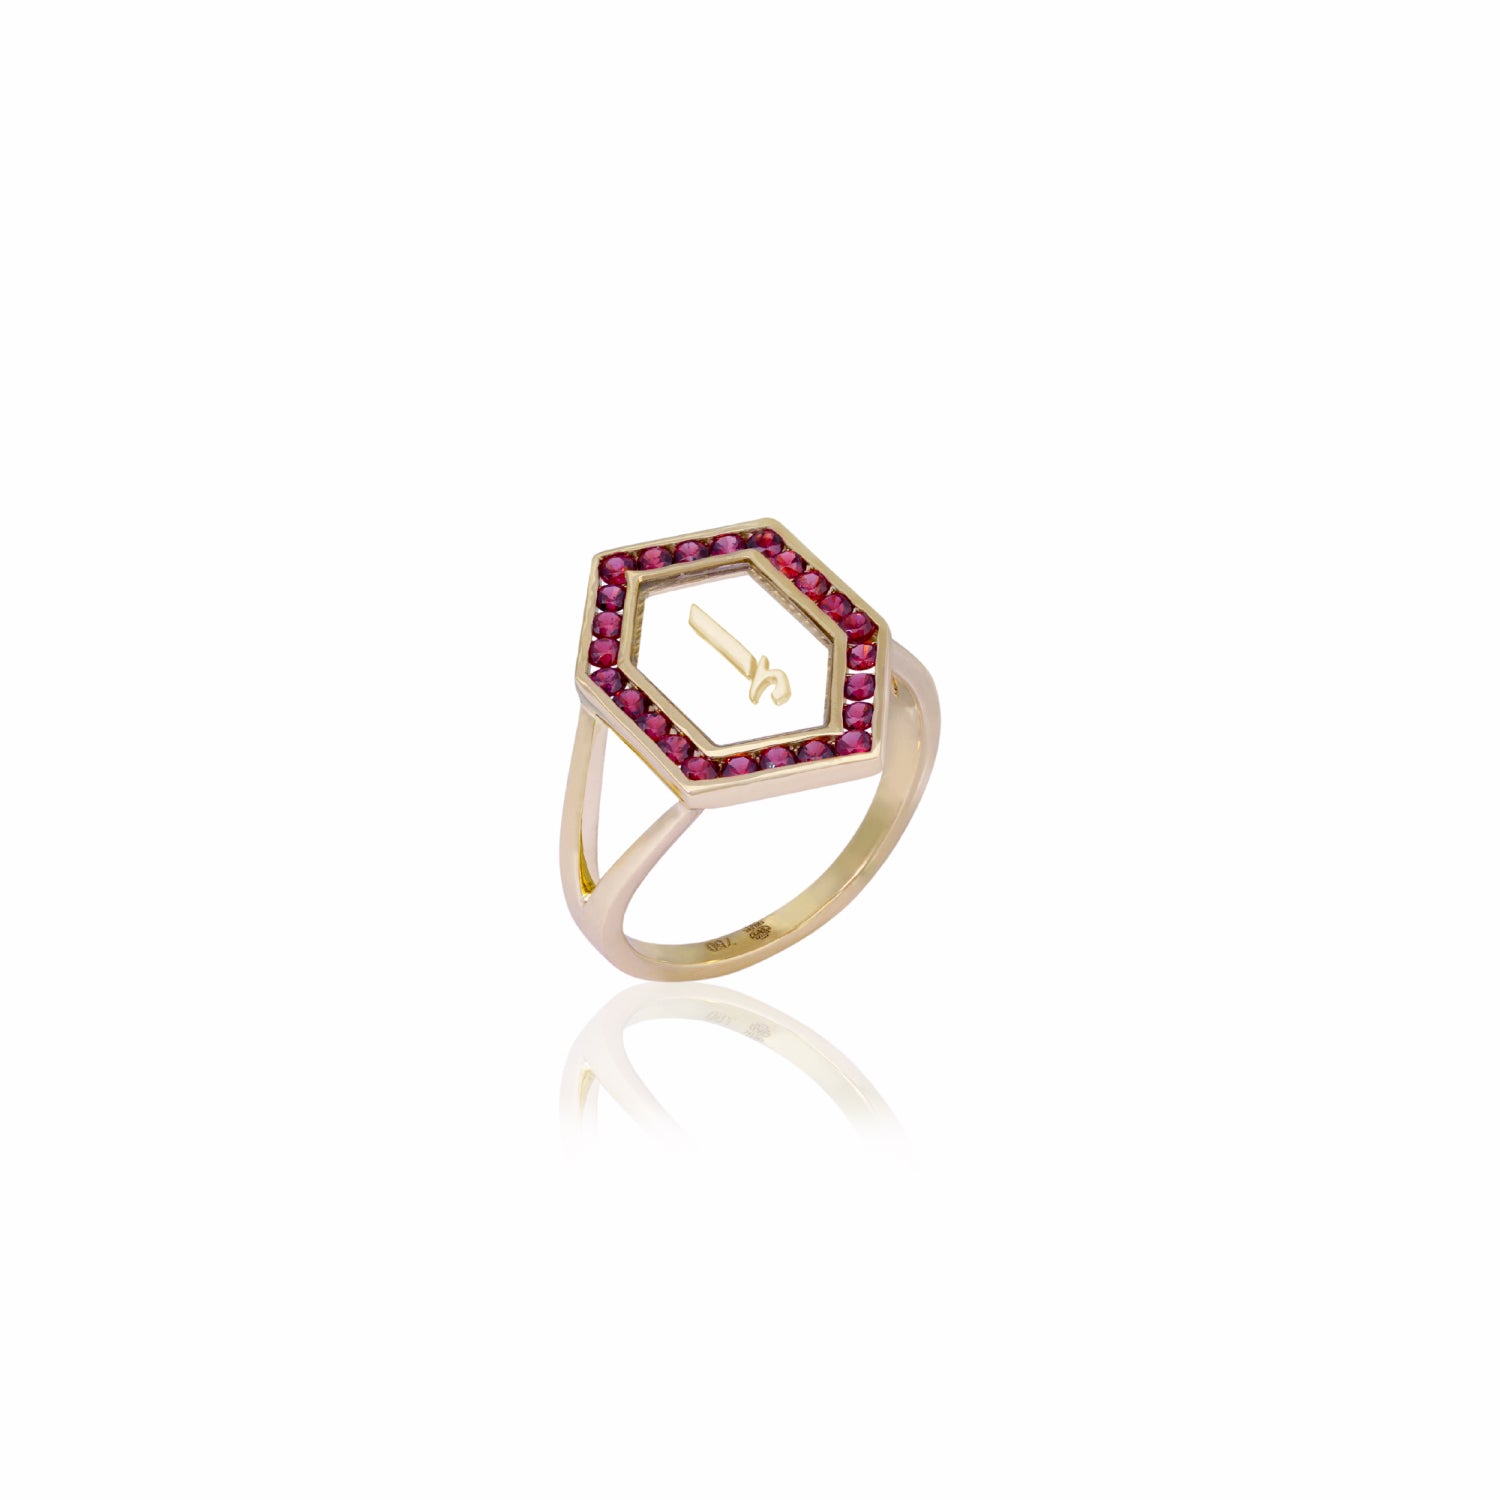 Qamoos 1.0 Letter إ Ruby Ring in Yellow Gold